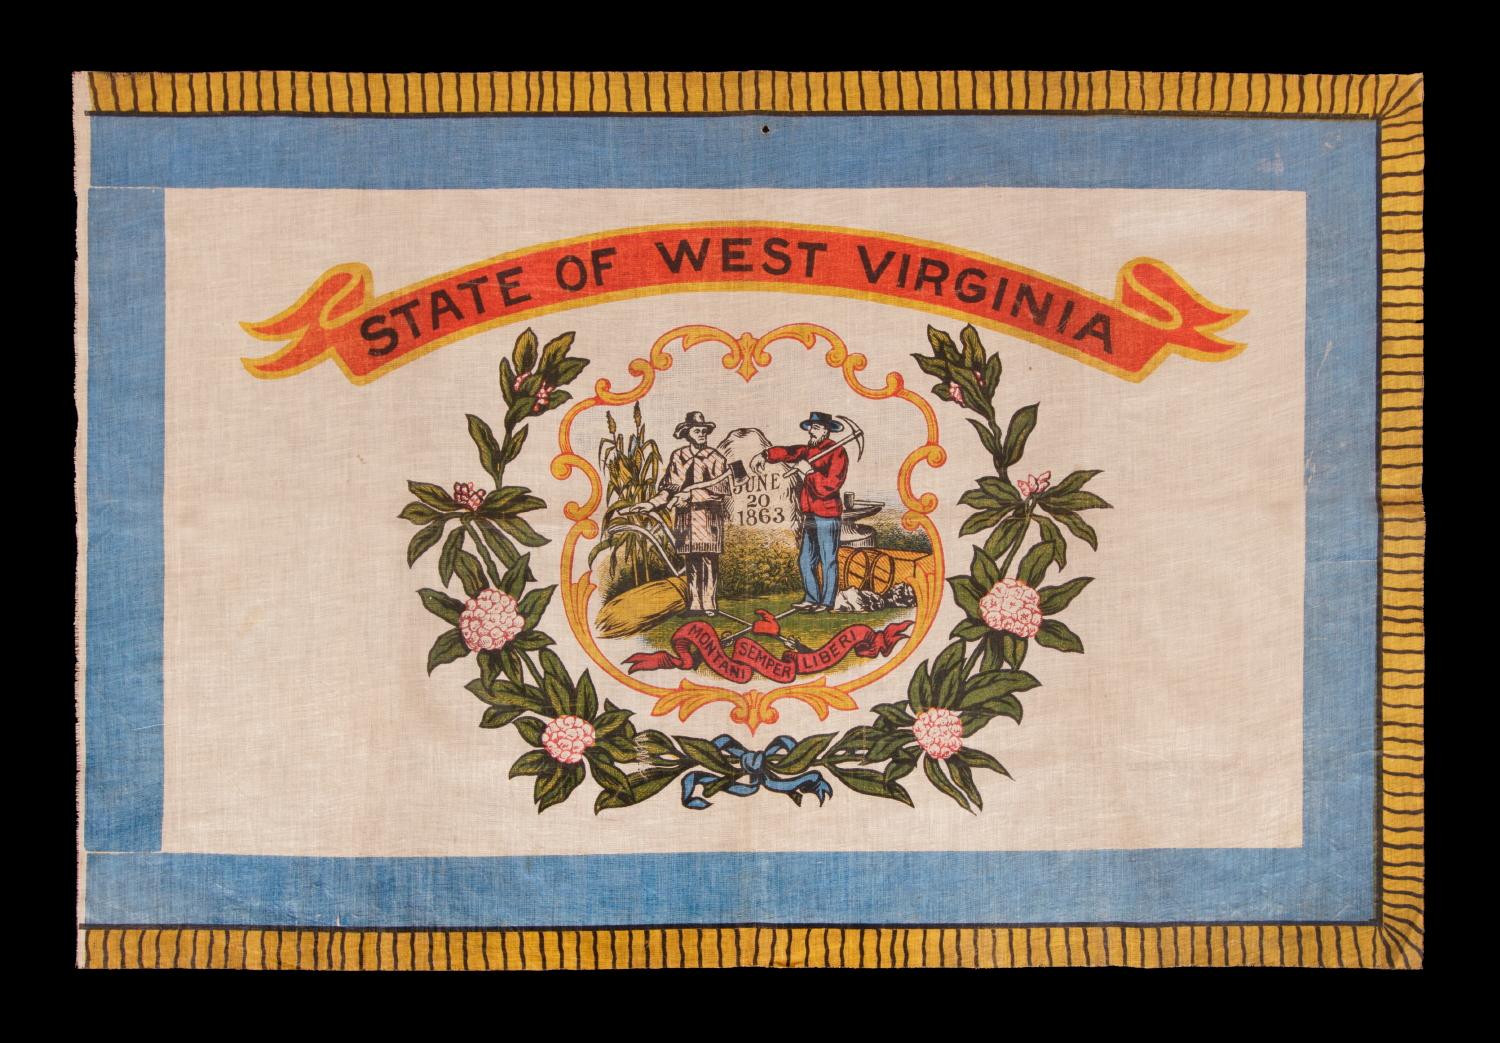 WEST VIRGINIA STATE PARADE FLAG ON GLAZED COTTON, CA 1929 OR PERHAPS PRIOR, A RARE AND BEAUTIFUL EXAMPLE:
 
The Great Seal of the State of West Virginia was adopted during the Civil War, on September 26, 1863. This occurred just three months after